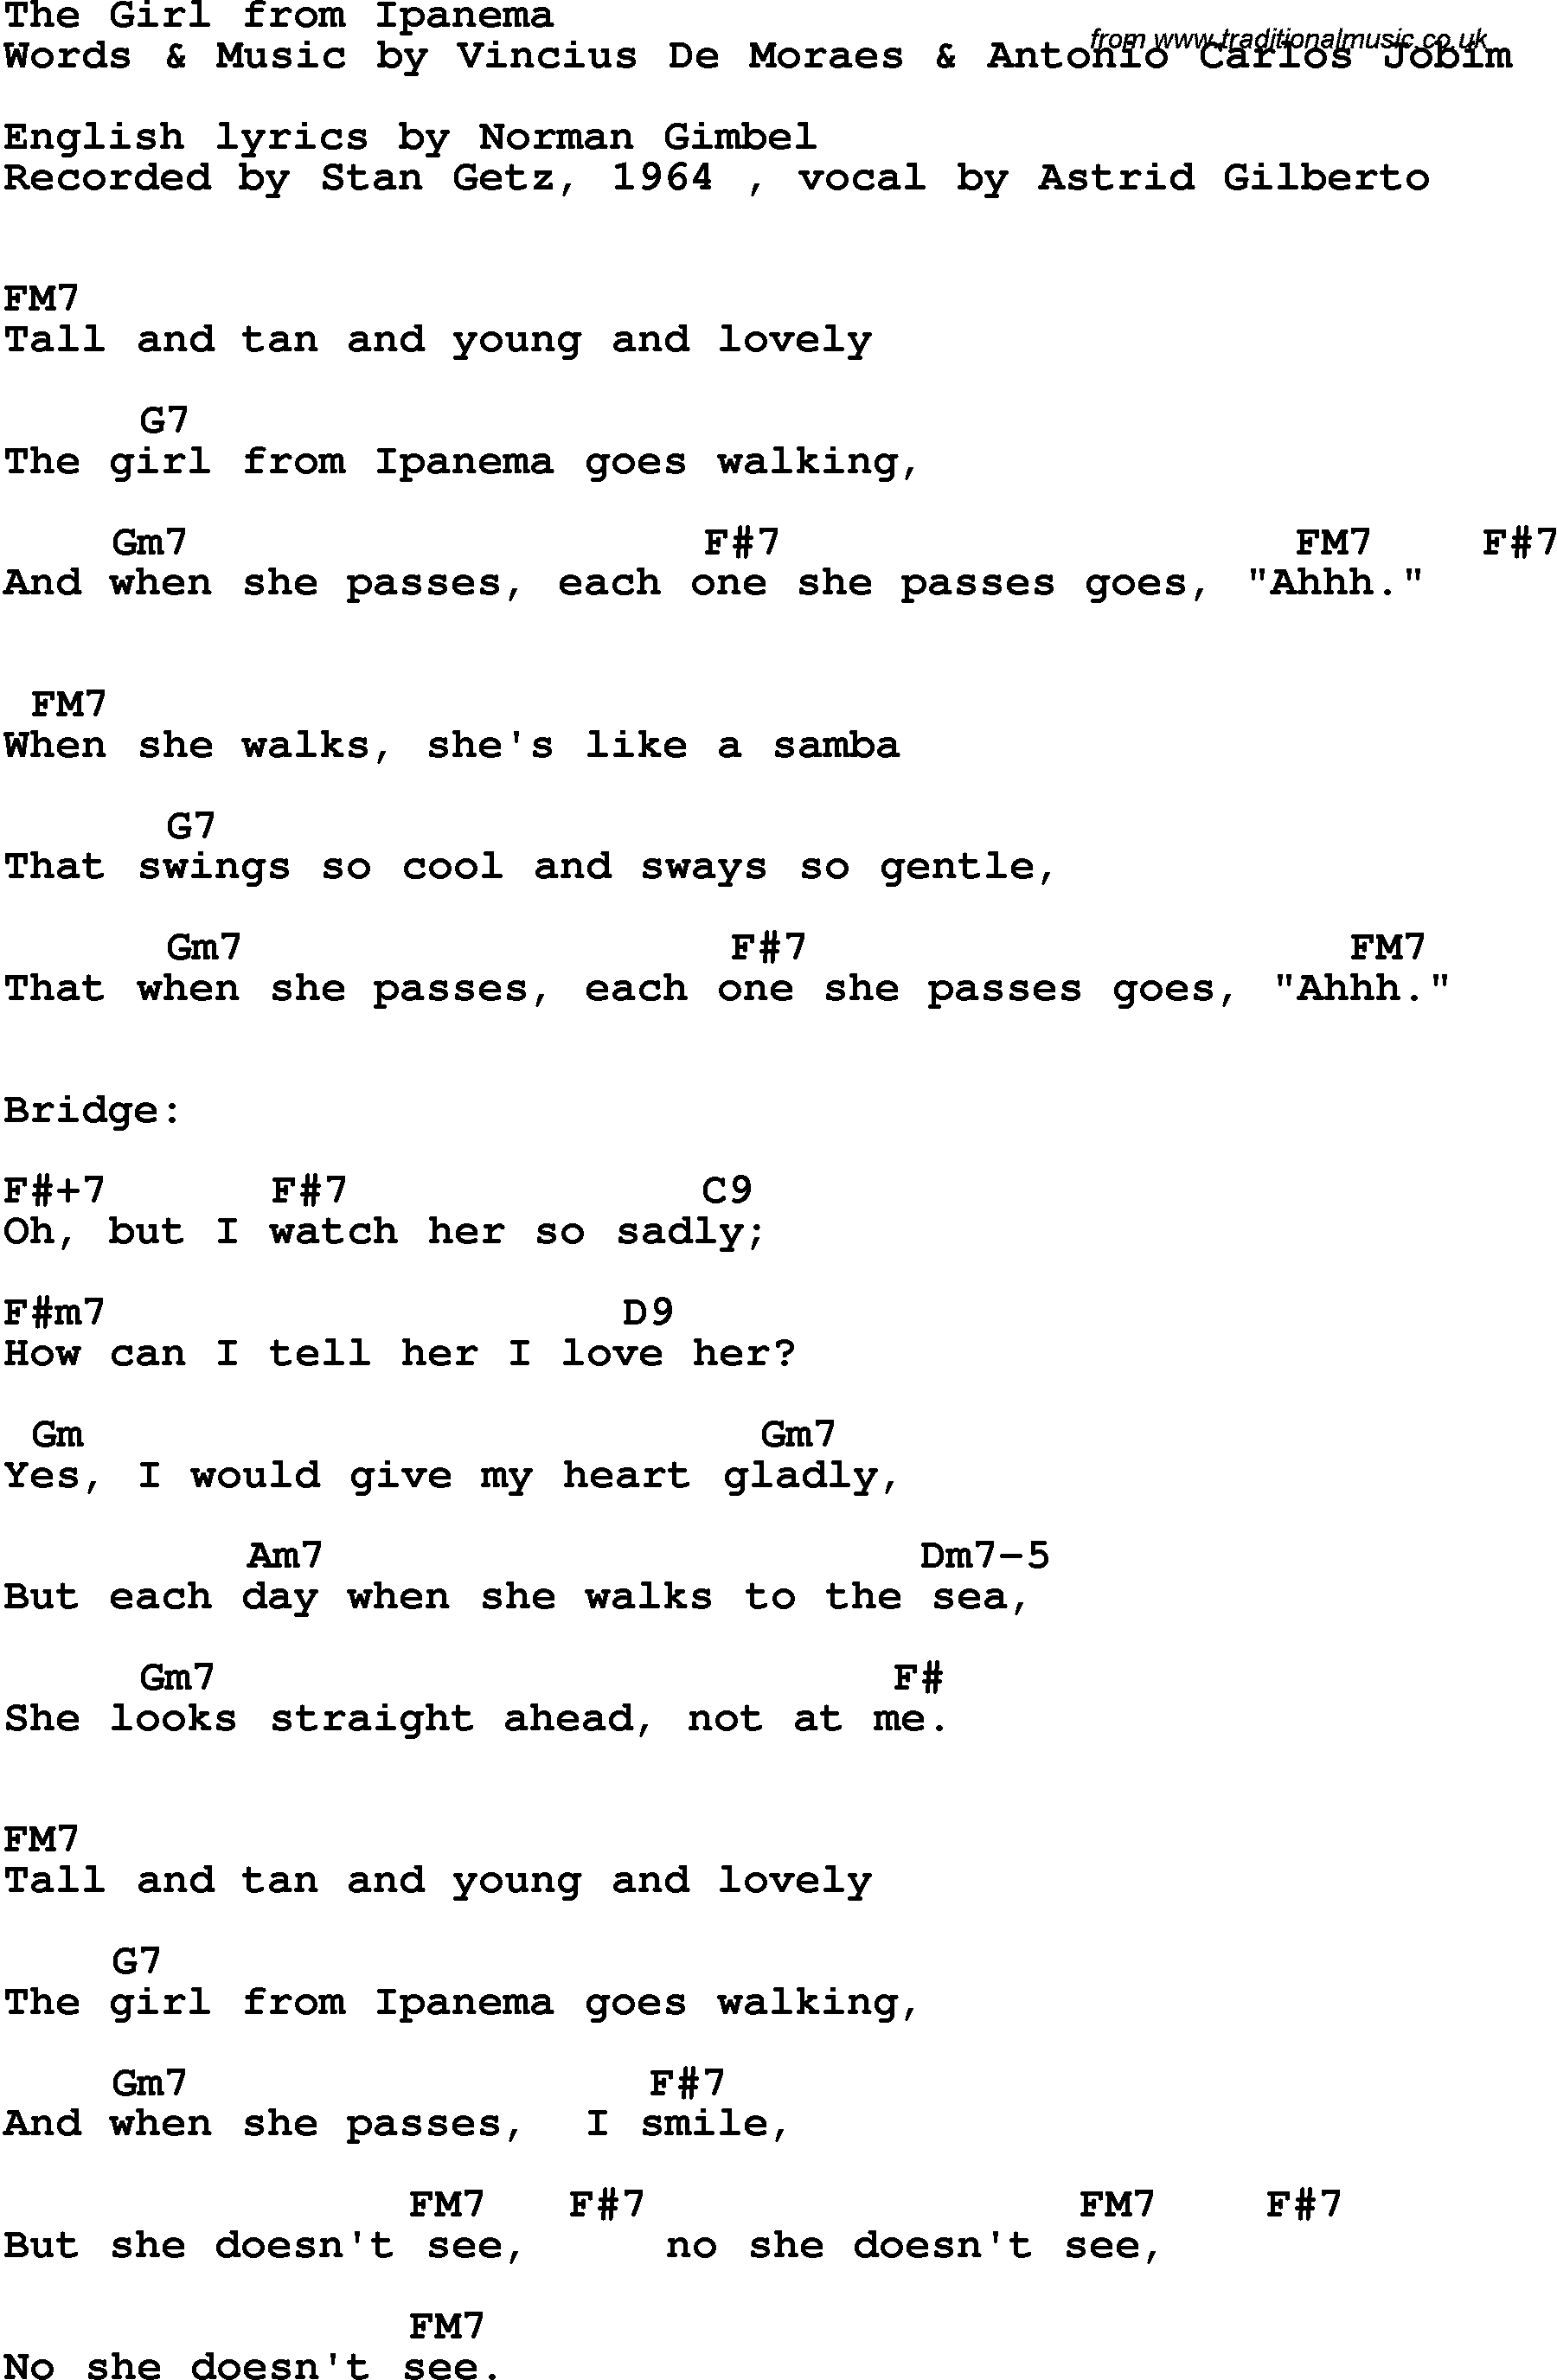 Song Lyrics with guitar chords for Girl From Ipanema, The - Stan Getz, 1964